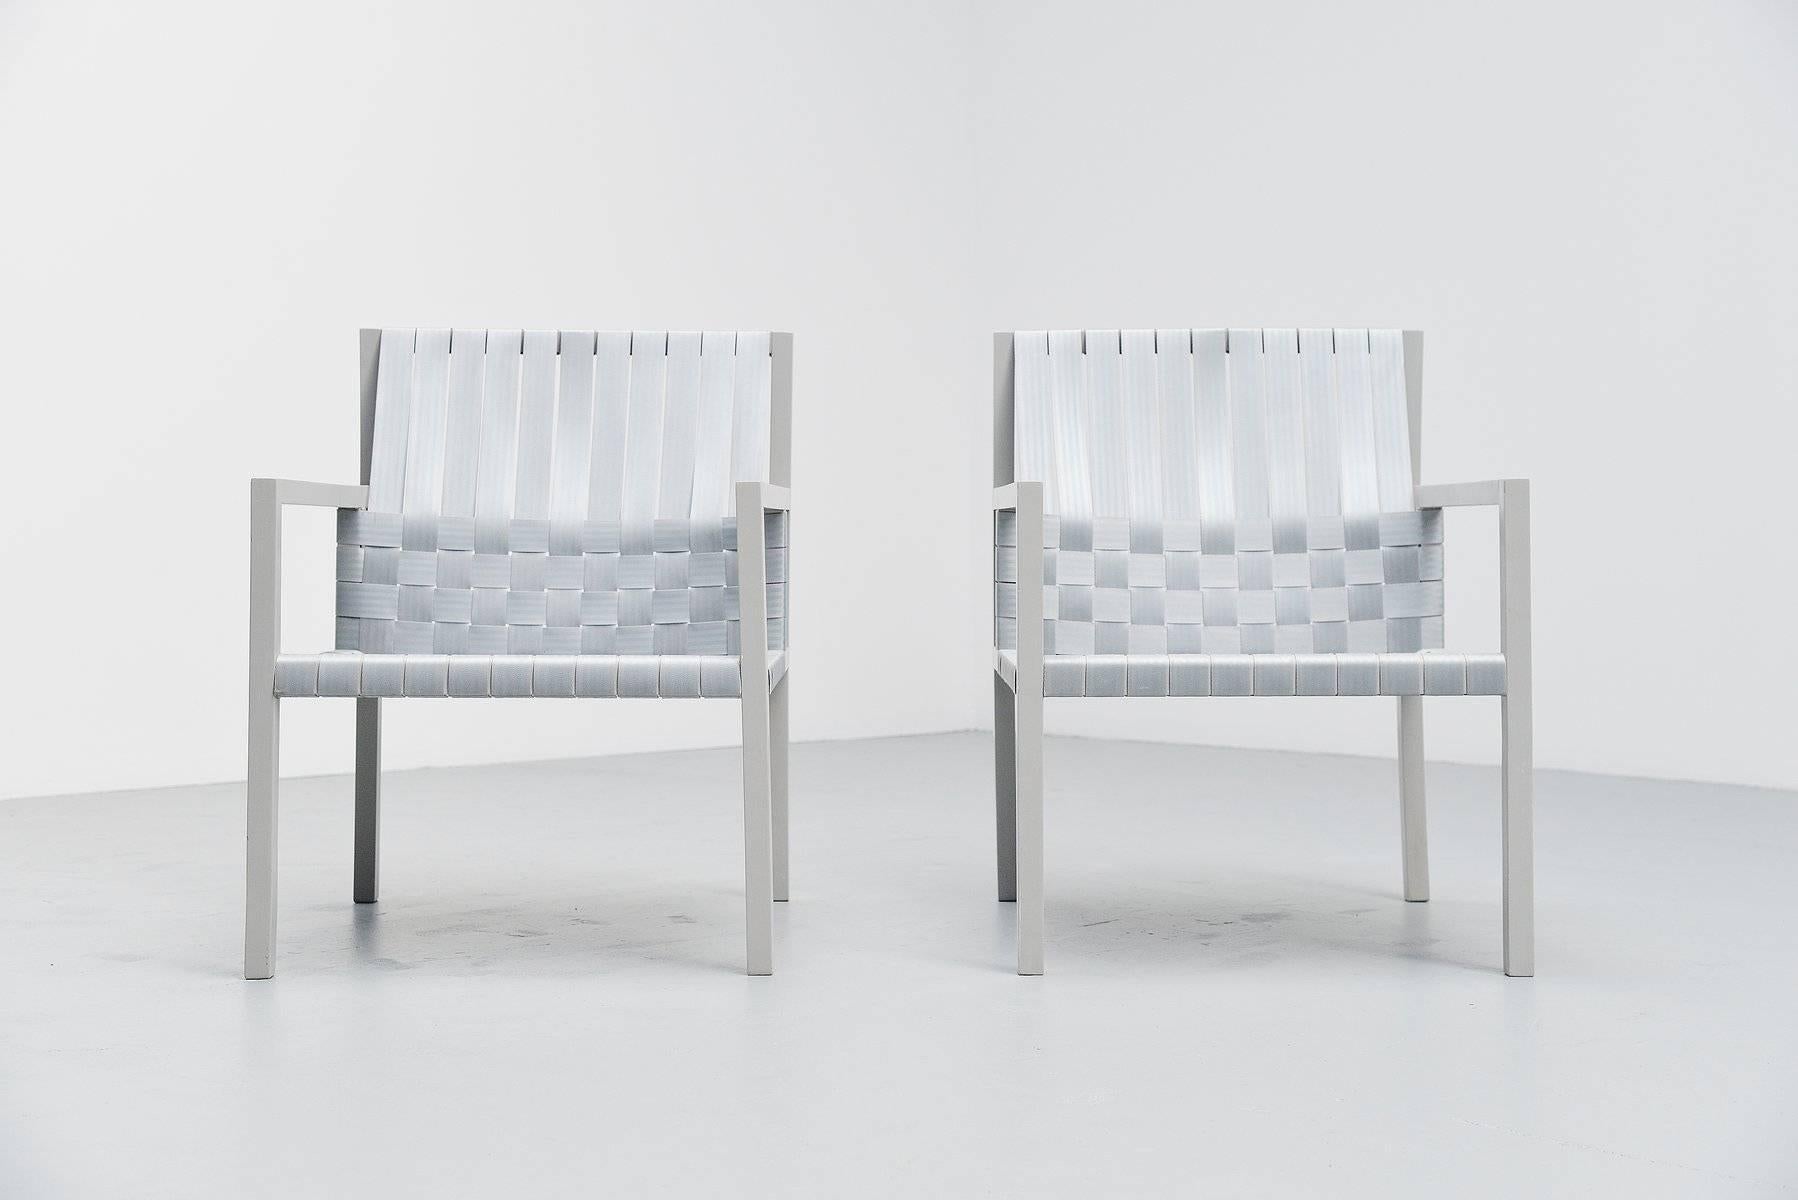 Fantastic pair of easy chair designed by Gijs Bakker for Castelijn, Holland, 1978. This chair called webbing chair, but soon got the name seatbelt chair as the seats are made of woven seatbelts. This chair was designed in 1978 but only produced for